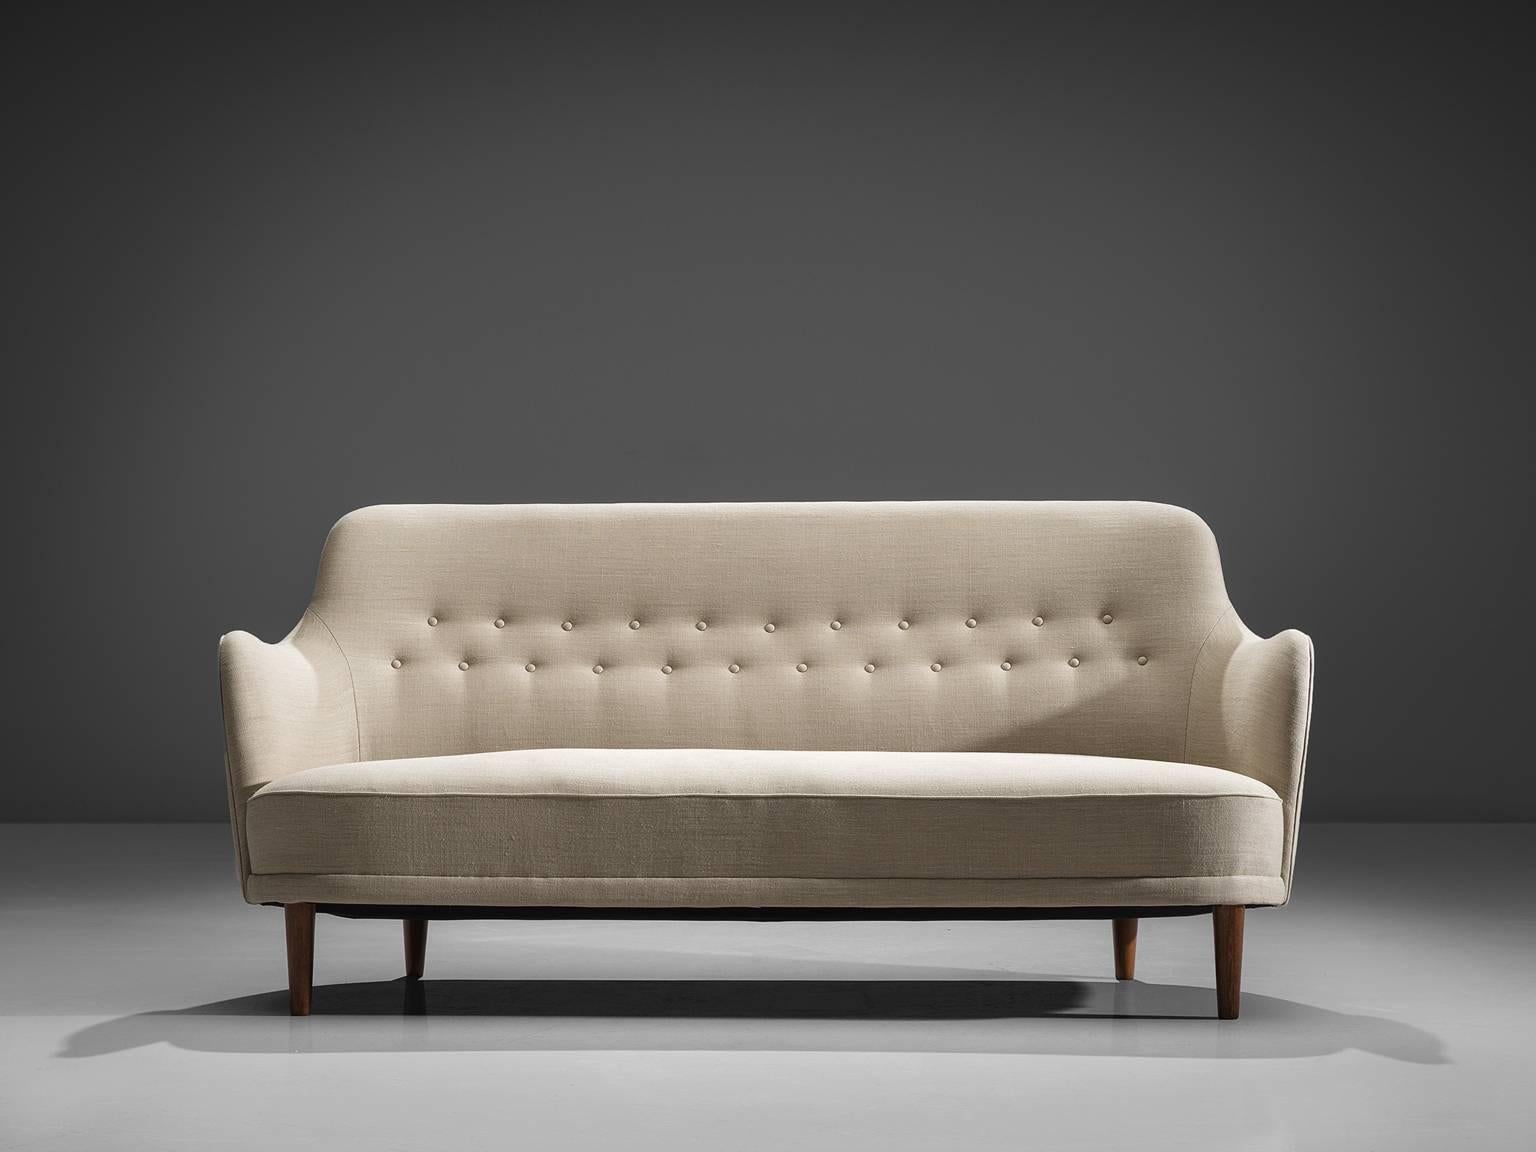 Carl Malmsten for O.H. Sjo¨gren, sofa 'Samsas', white fabric and birch by Sweden, 1940s. 

Elegant Swedish sofa by designer Carl Malmsten. The design of this piece originates from 1923. It's a characteristic piece of Malmsten, with classical